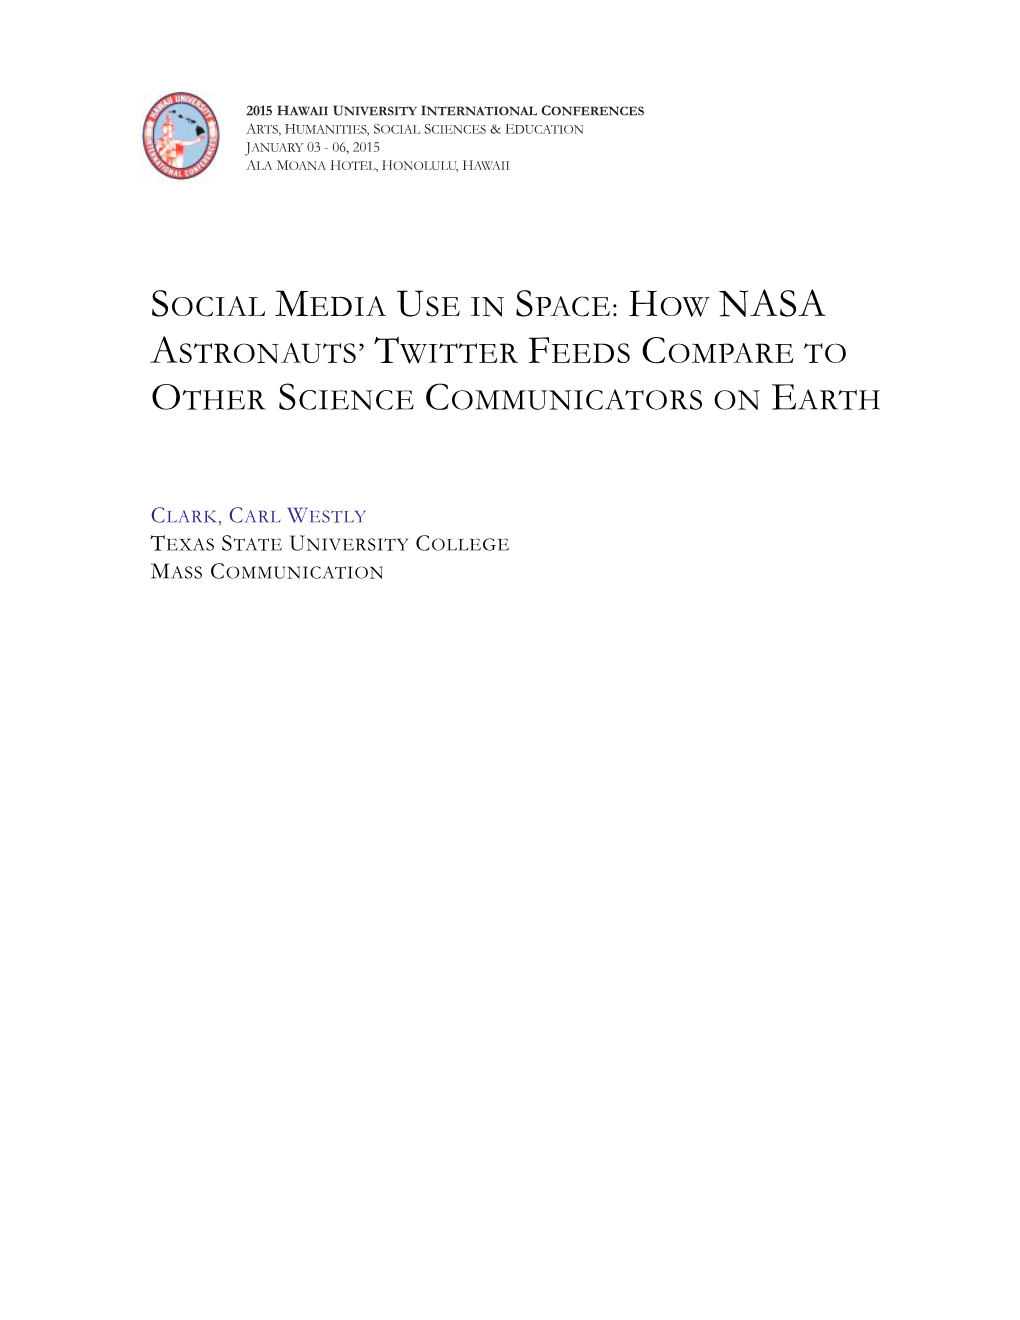 Social Media Use in Space: How NASA Astronauts' Twitter Feeds